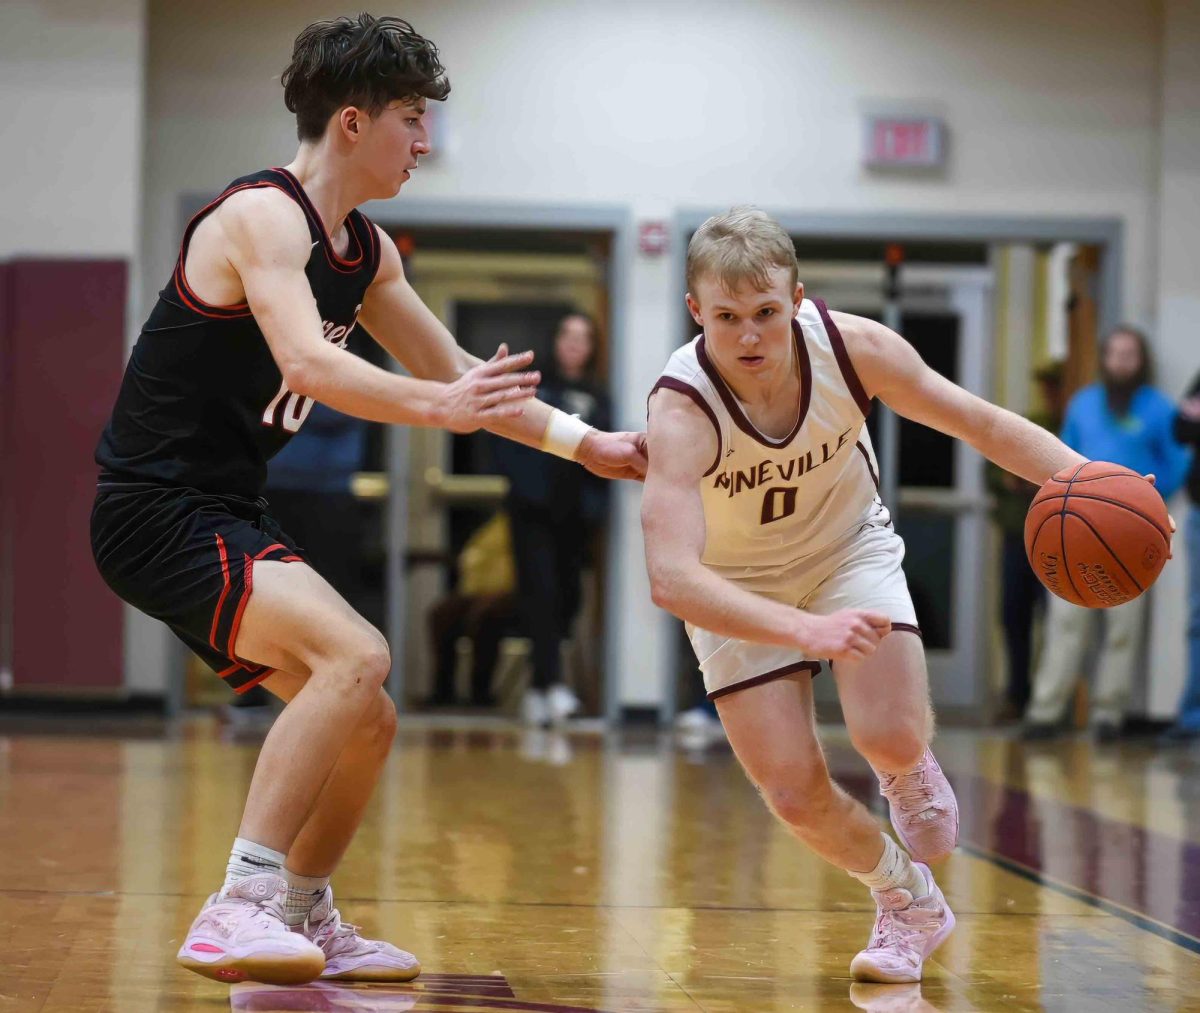 Pineville guard Sawyer Thompson drove around Powell Countys Dylan Carter in championship game action Saturday at the Chain Rock Classic. Thompson scored 25 points in the Mountain Lions 84-73 win.